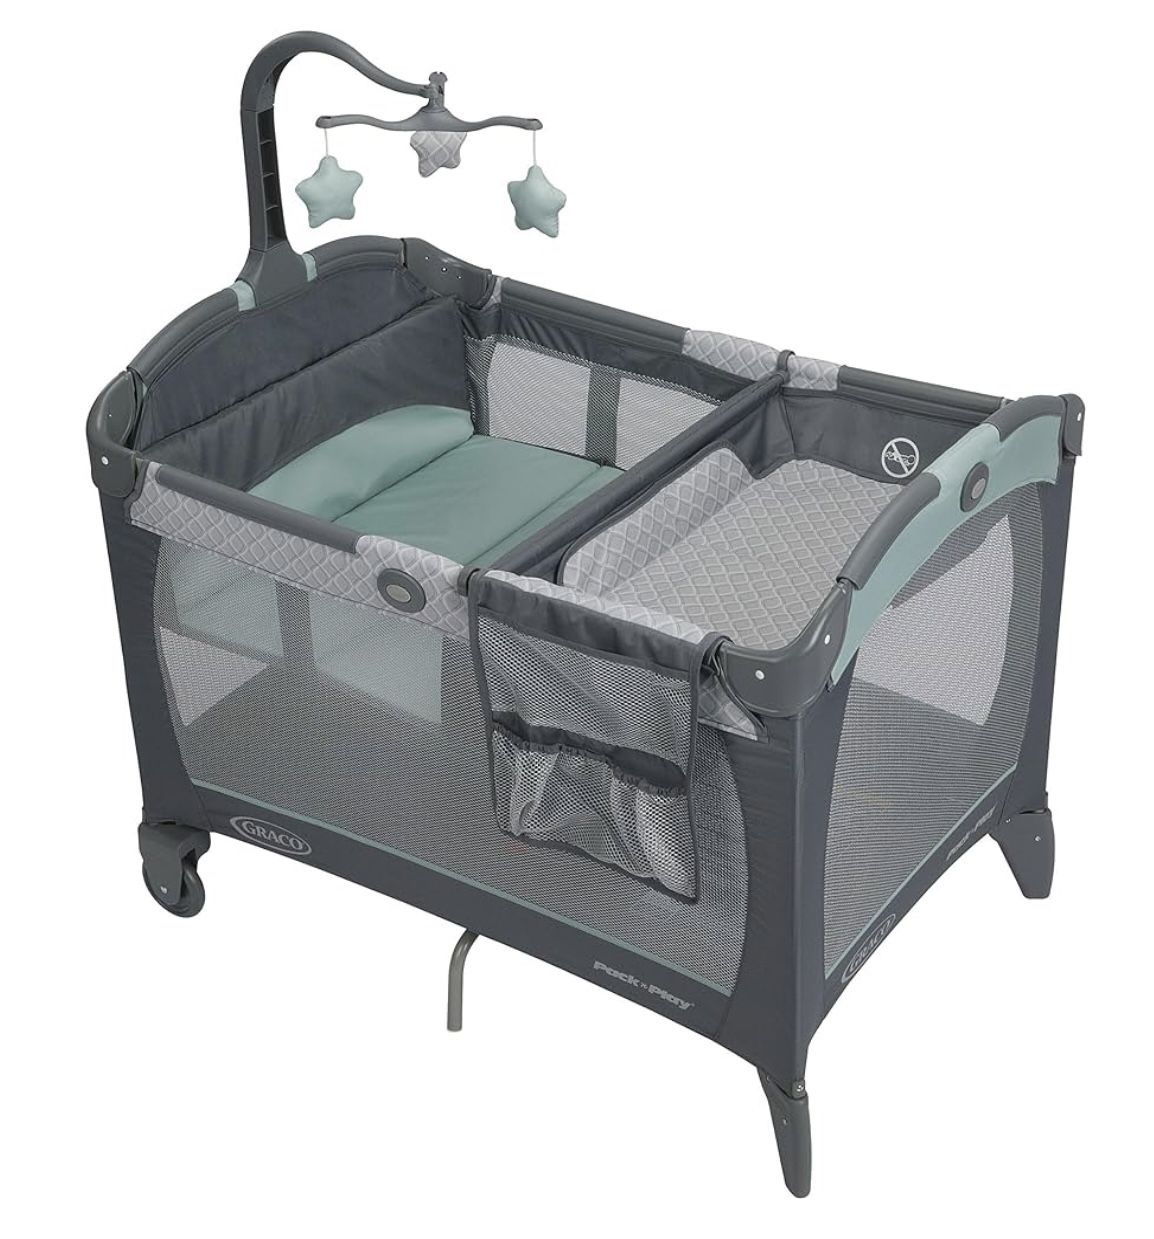 Graco Pack and Play Change 'n Carry Playard | Includes Portable Changing Pad, Excellent Condition, All Parts Included, Like New, Cost $159 On Amazon